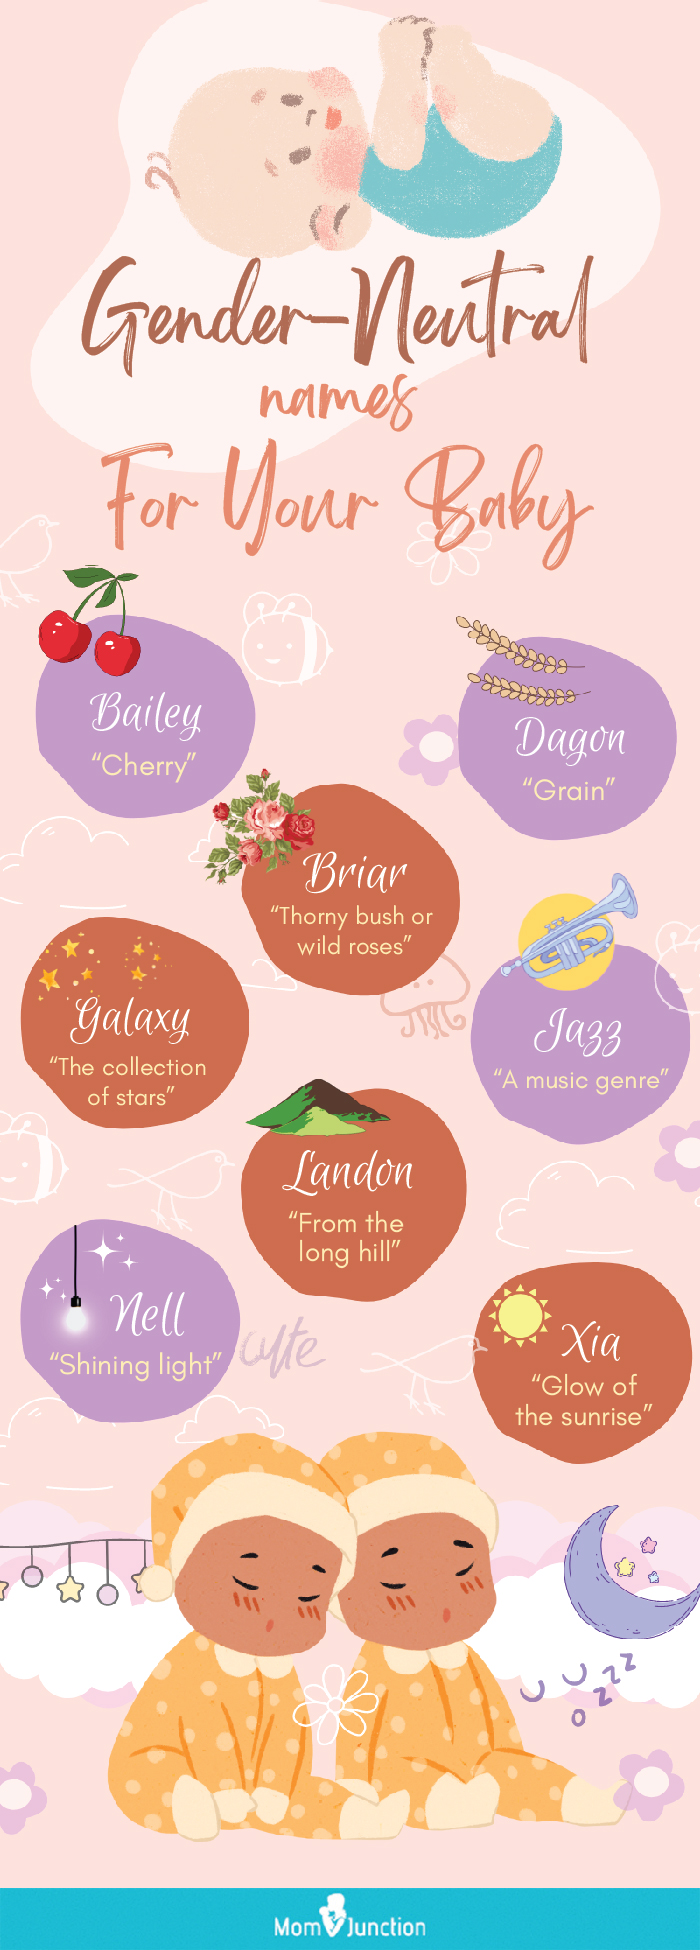 unisex baby names for your little one [infographic]